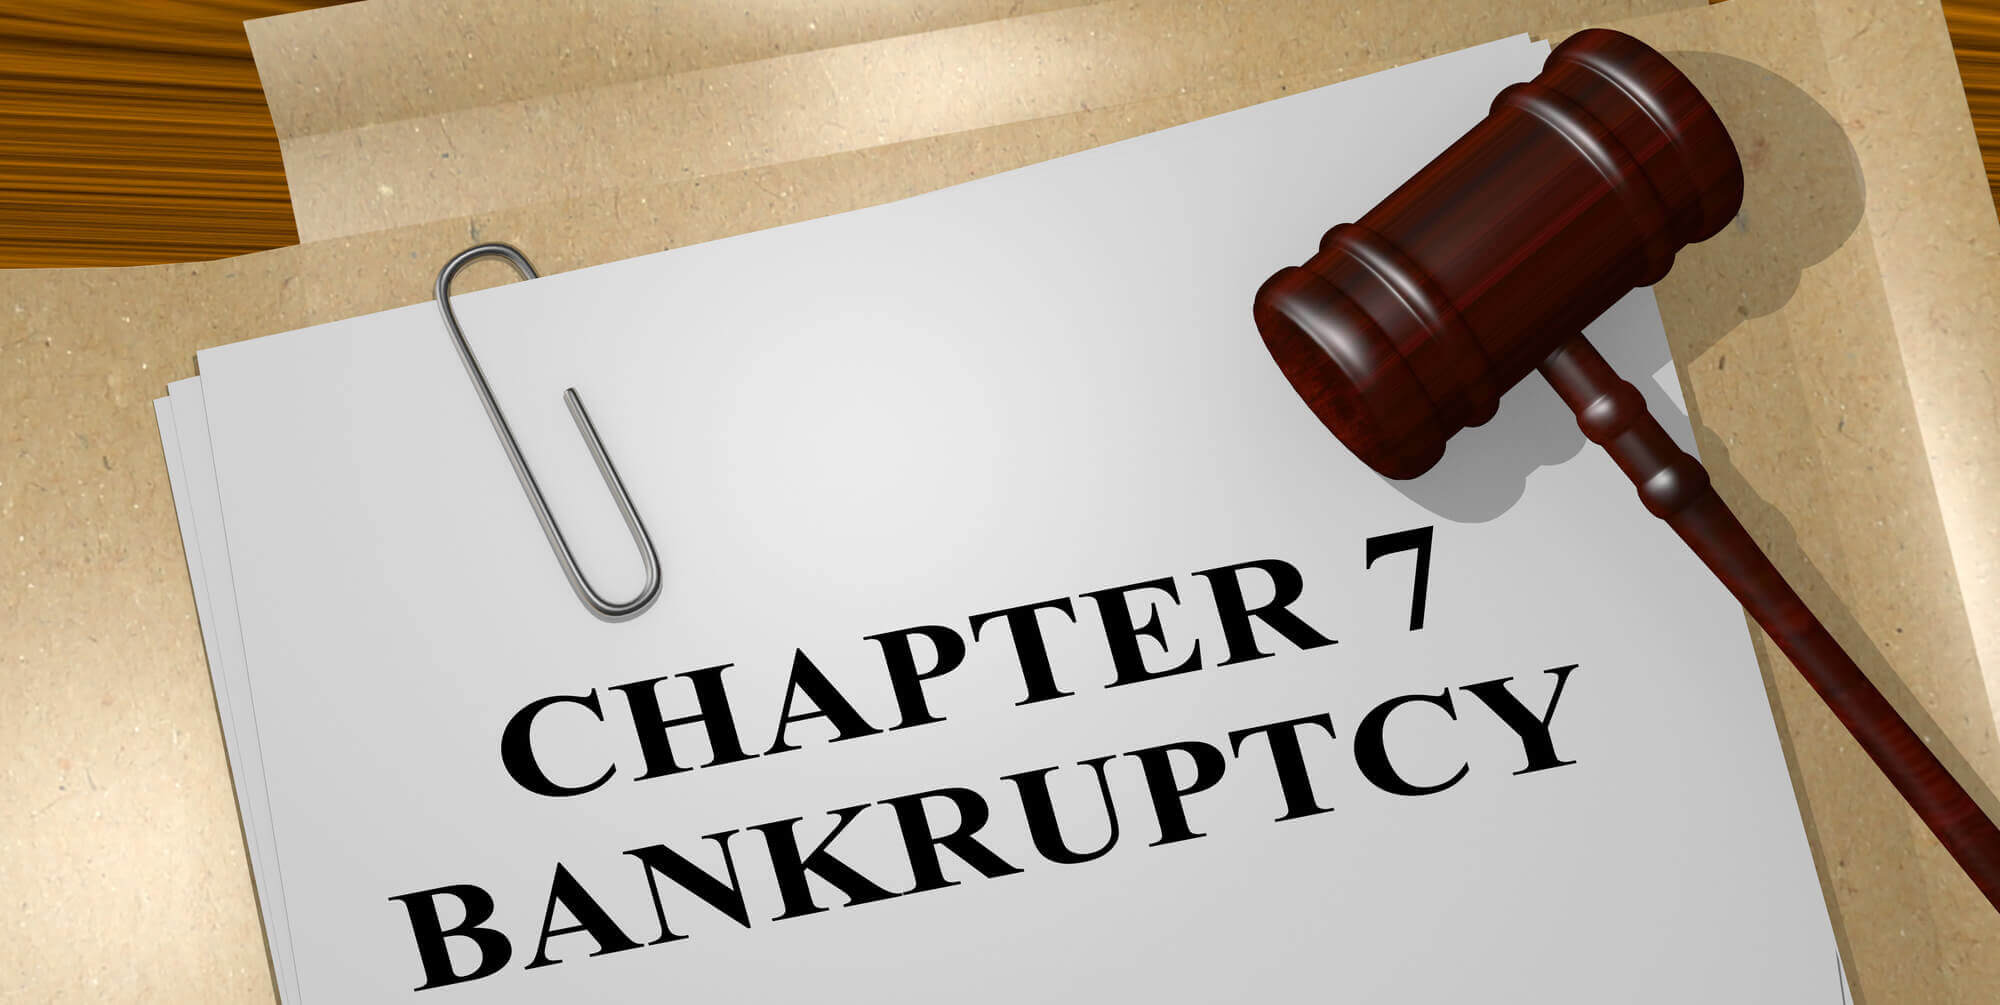 3D illustration of "CHAPTER 7 BANKRUPTCY" title on legal document